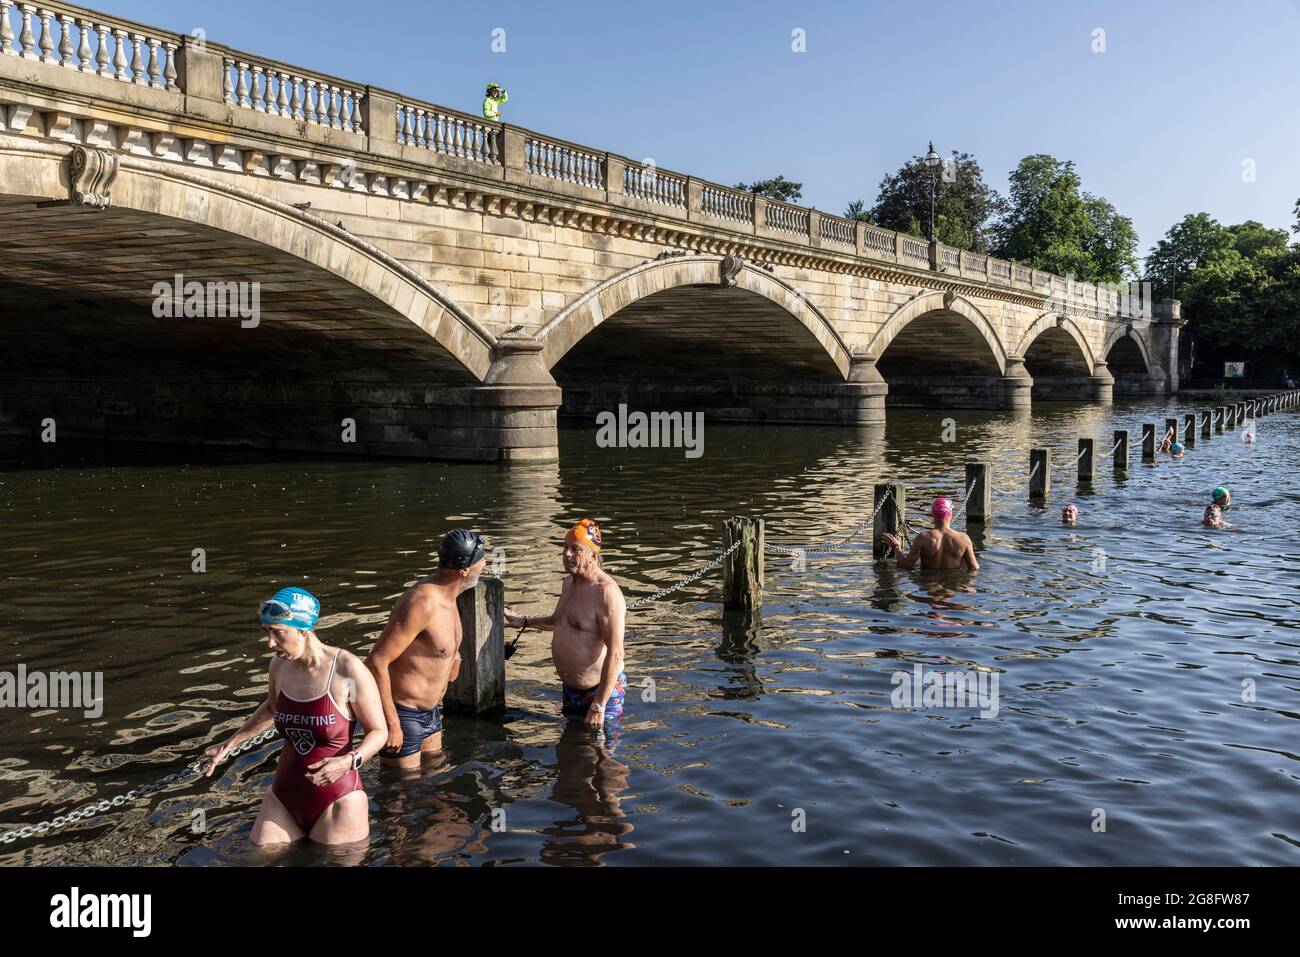 Serpentine Swimmers participate in the annual 'Bridge to Bridge' event. The race over approximately 1000 yards from Dell Bridget to Rennies Bridge. Stock Photo